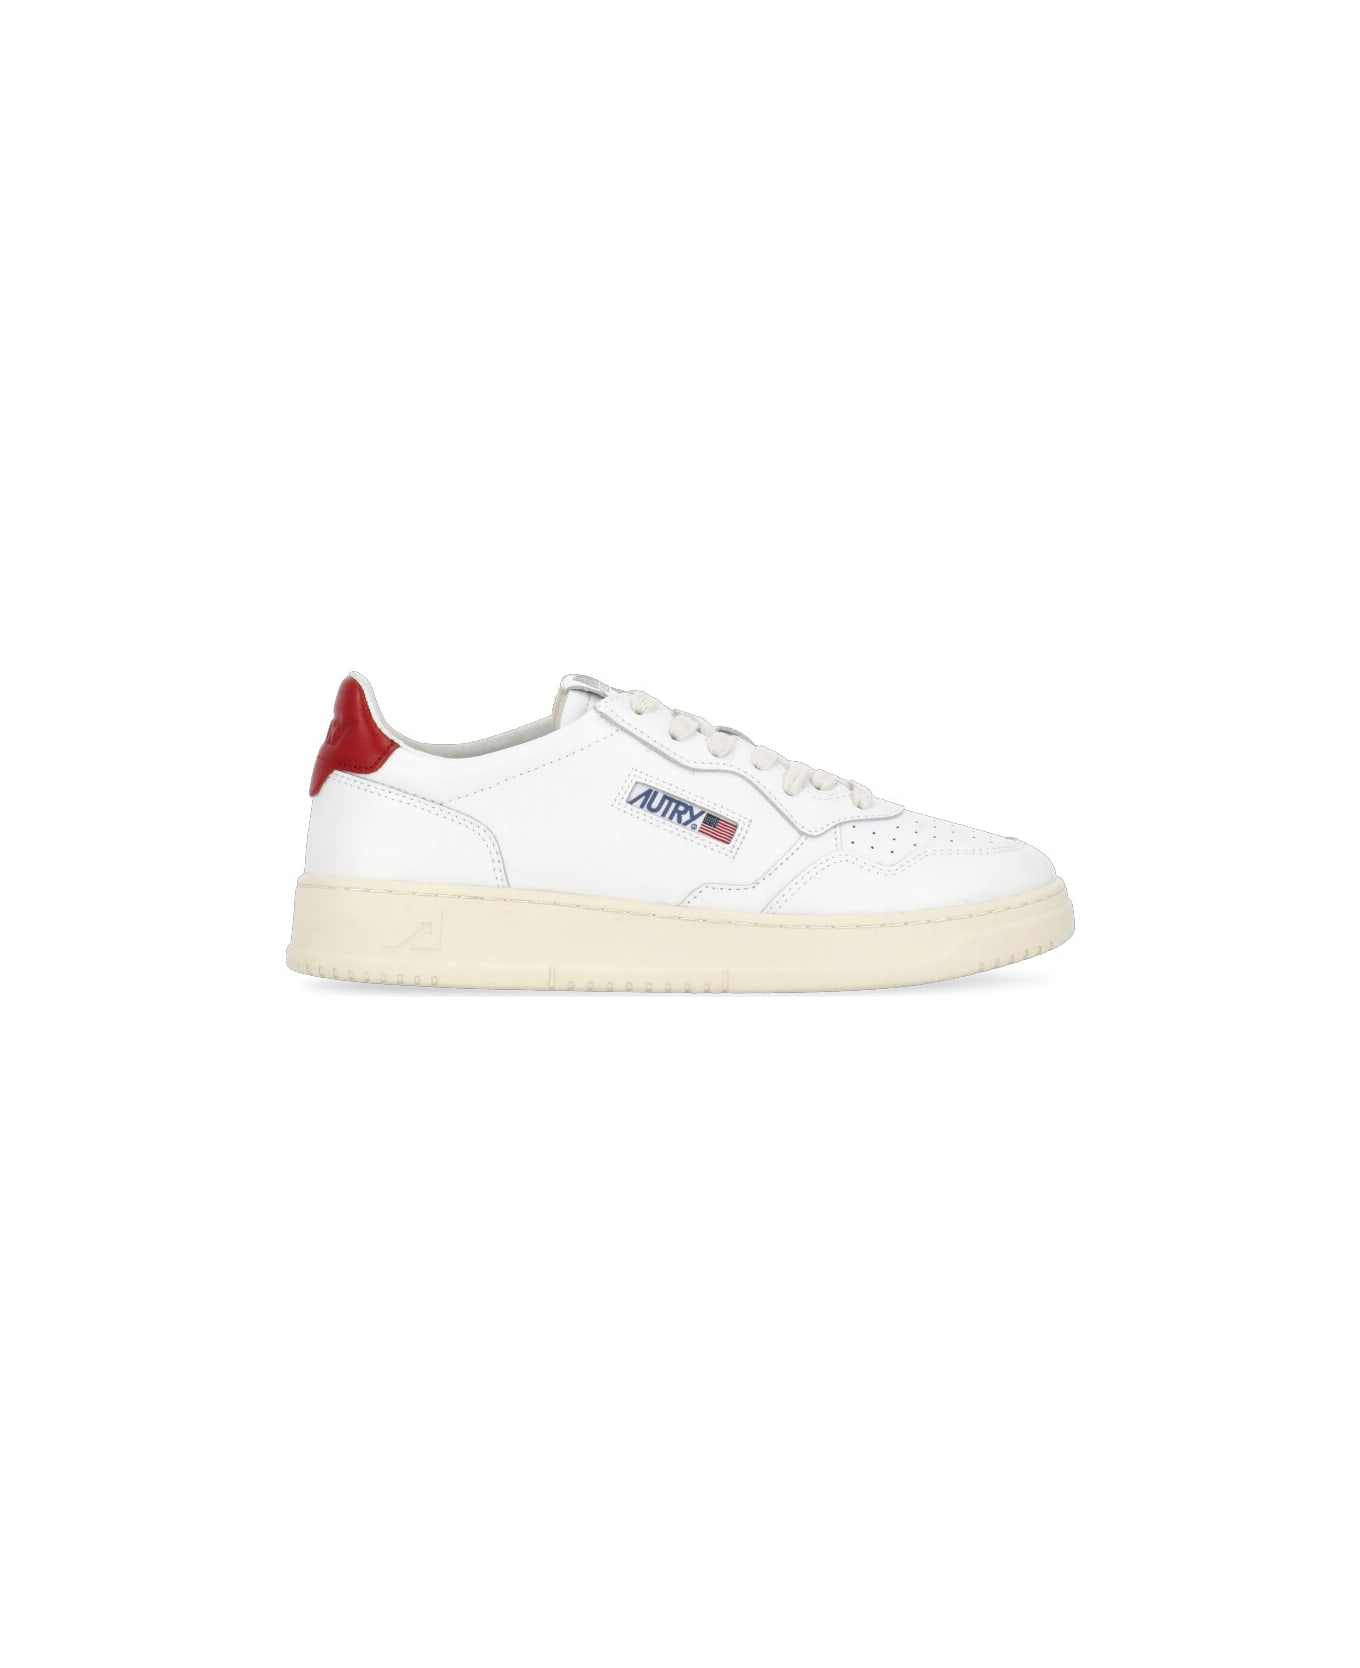 Autry Aulm Ll21 Sneakers - White